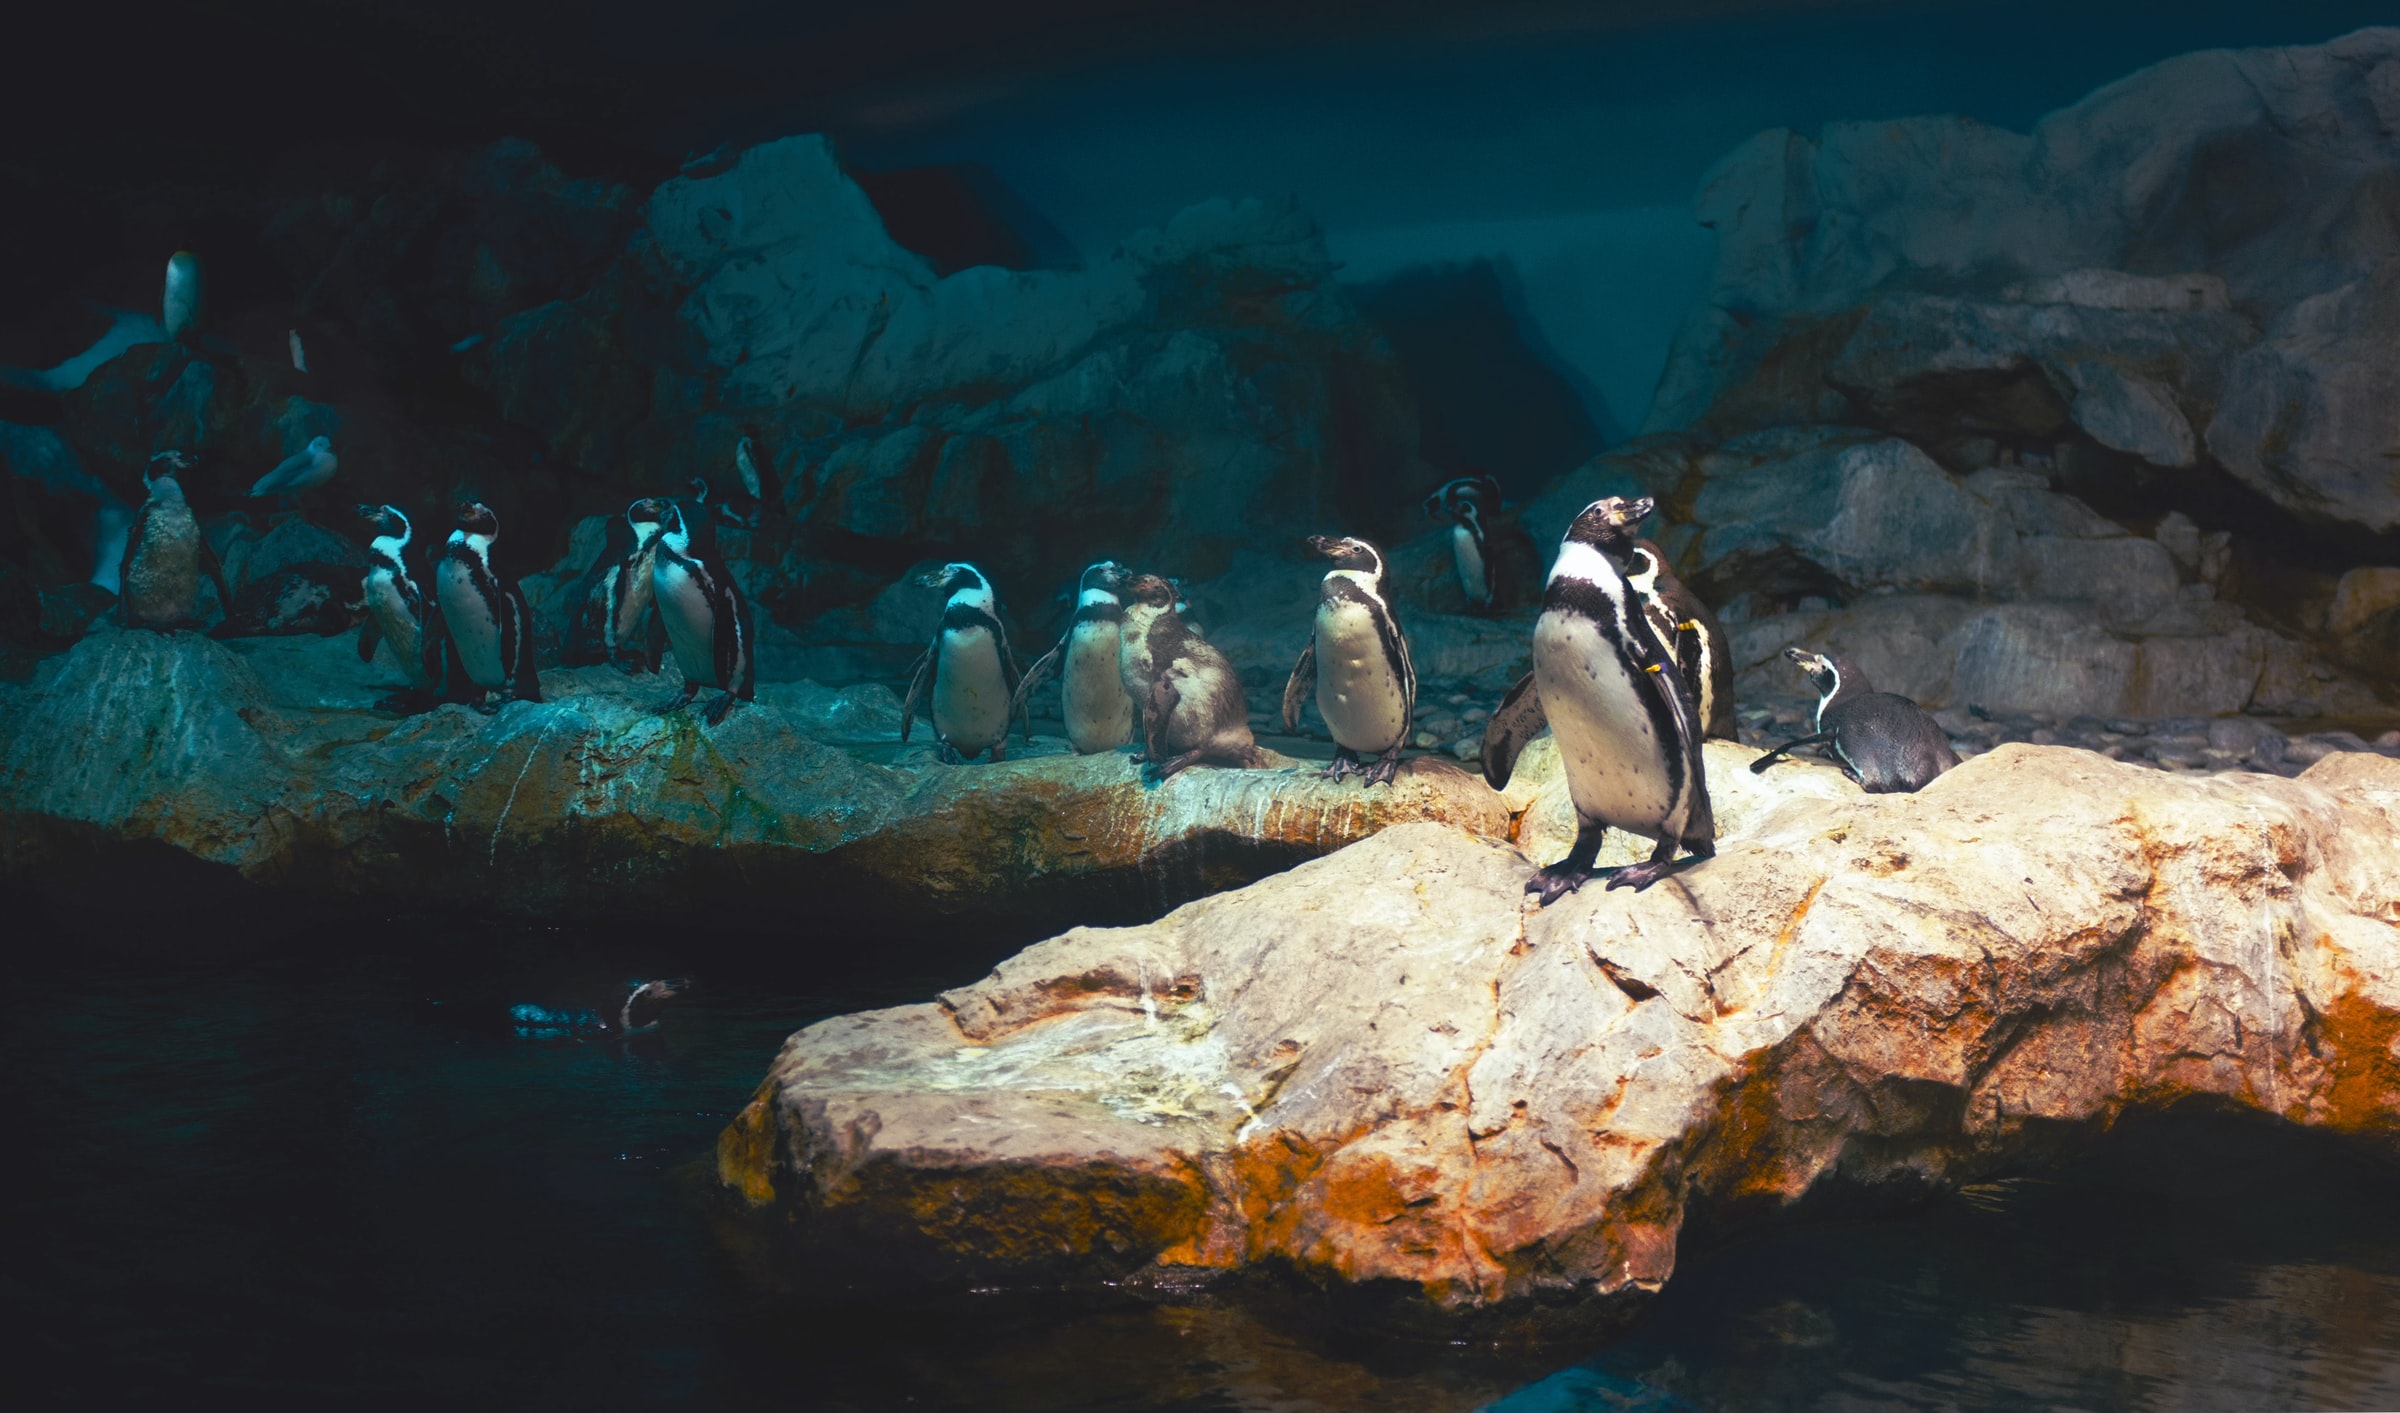 Many penguins standing on a rock in a mostly dark space.